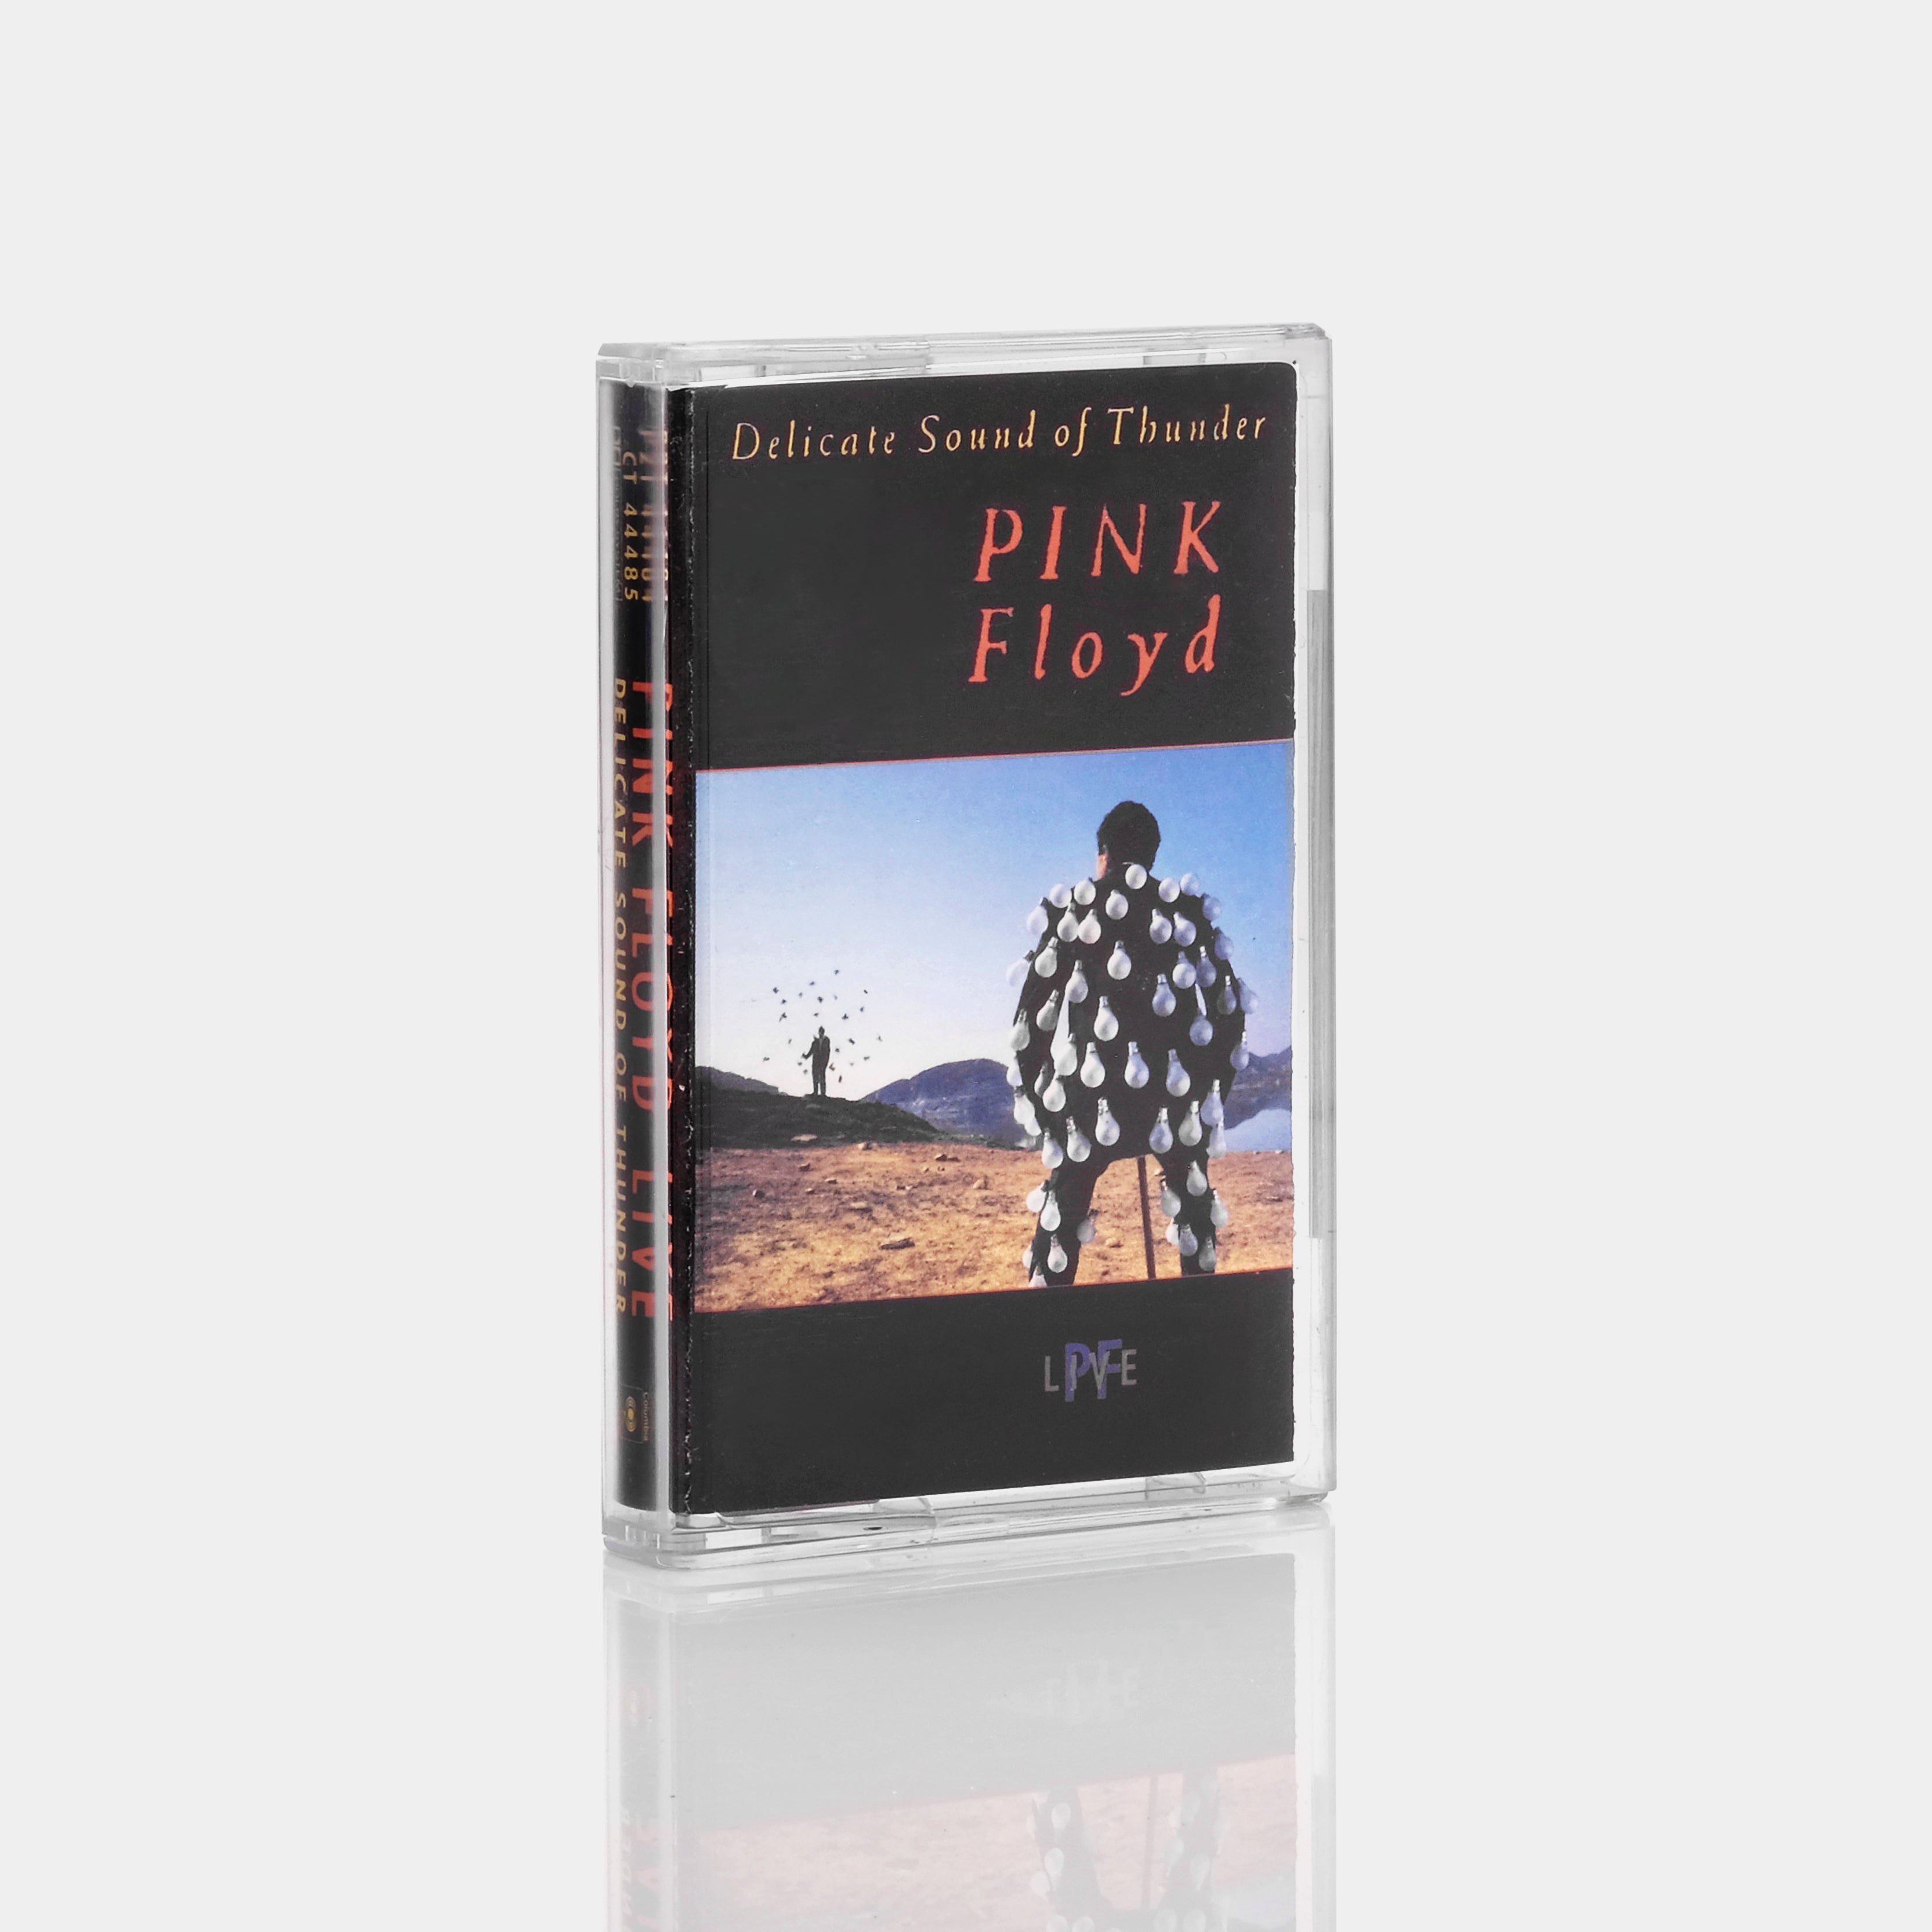 Pink Floyd - Delicate Sound Of Thunder (Tape 1 of 2) Cassette Tape